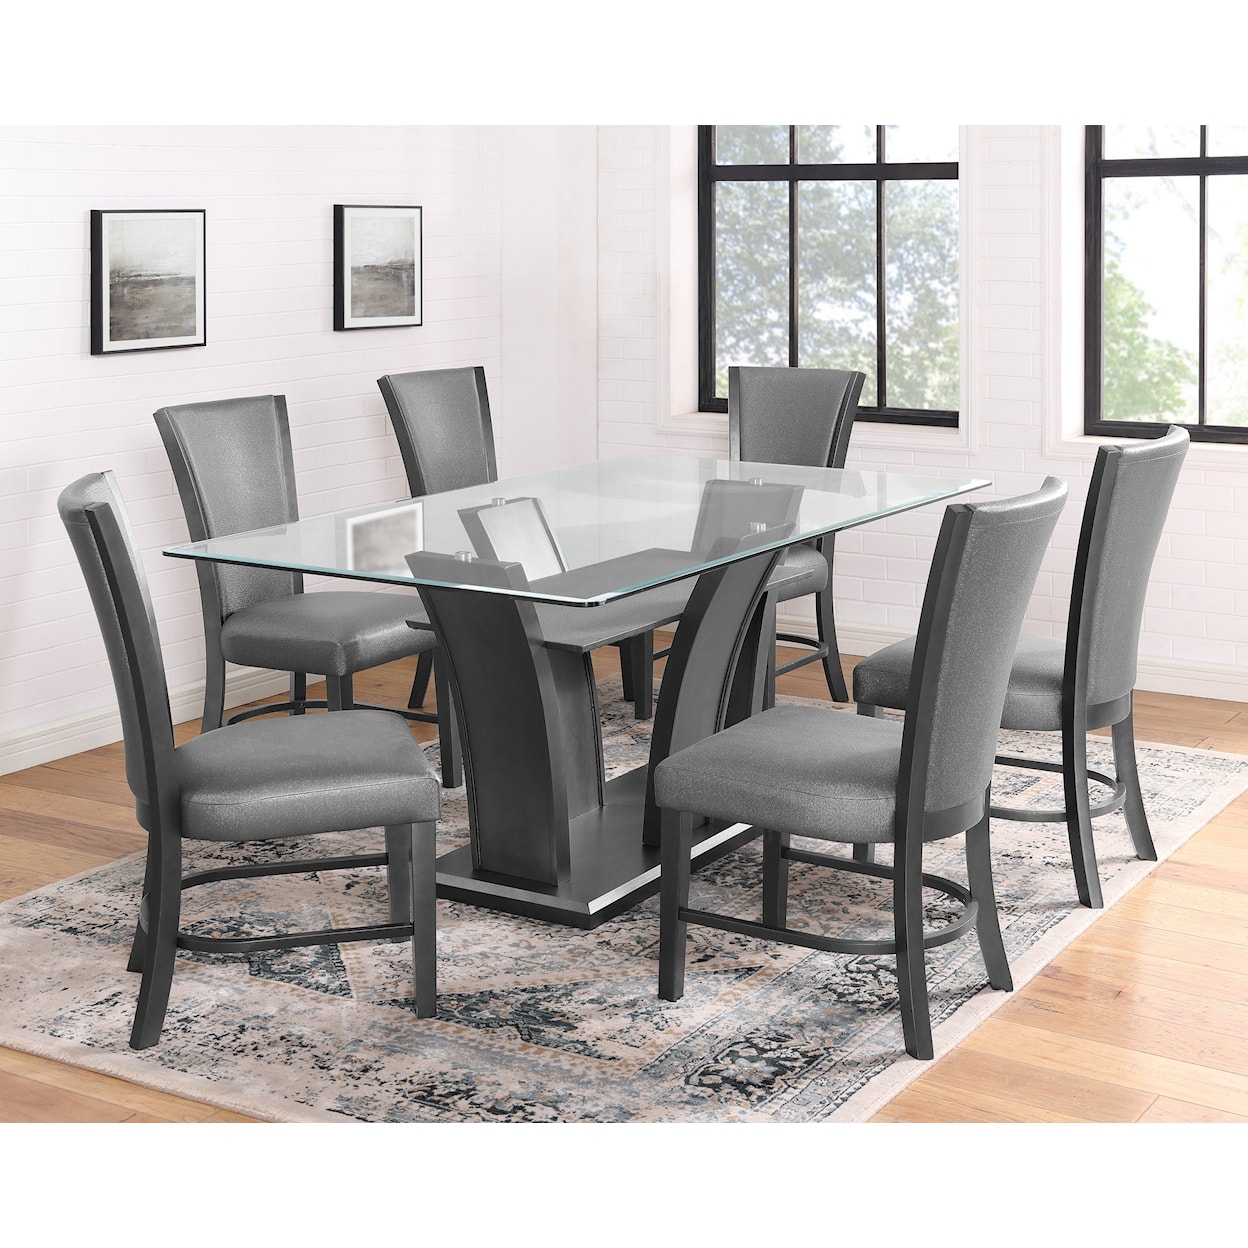 CM Camelia Upholstered Dining Side Chair